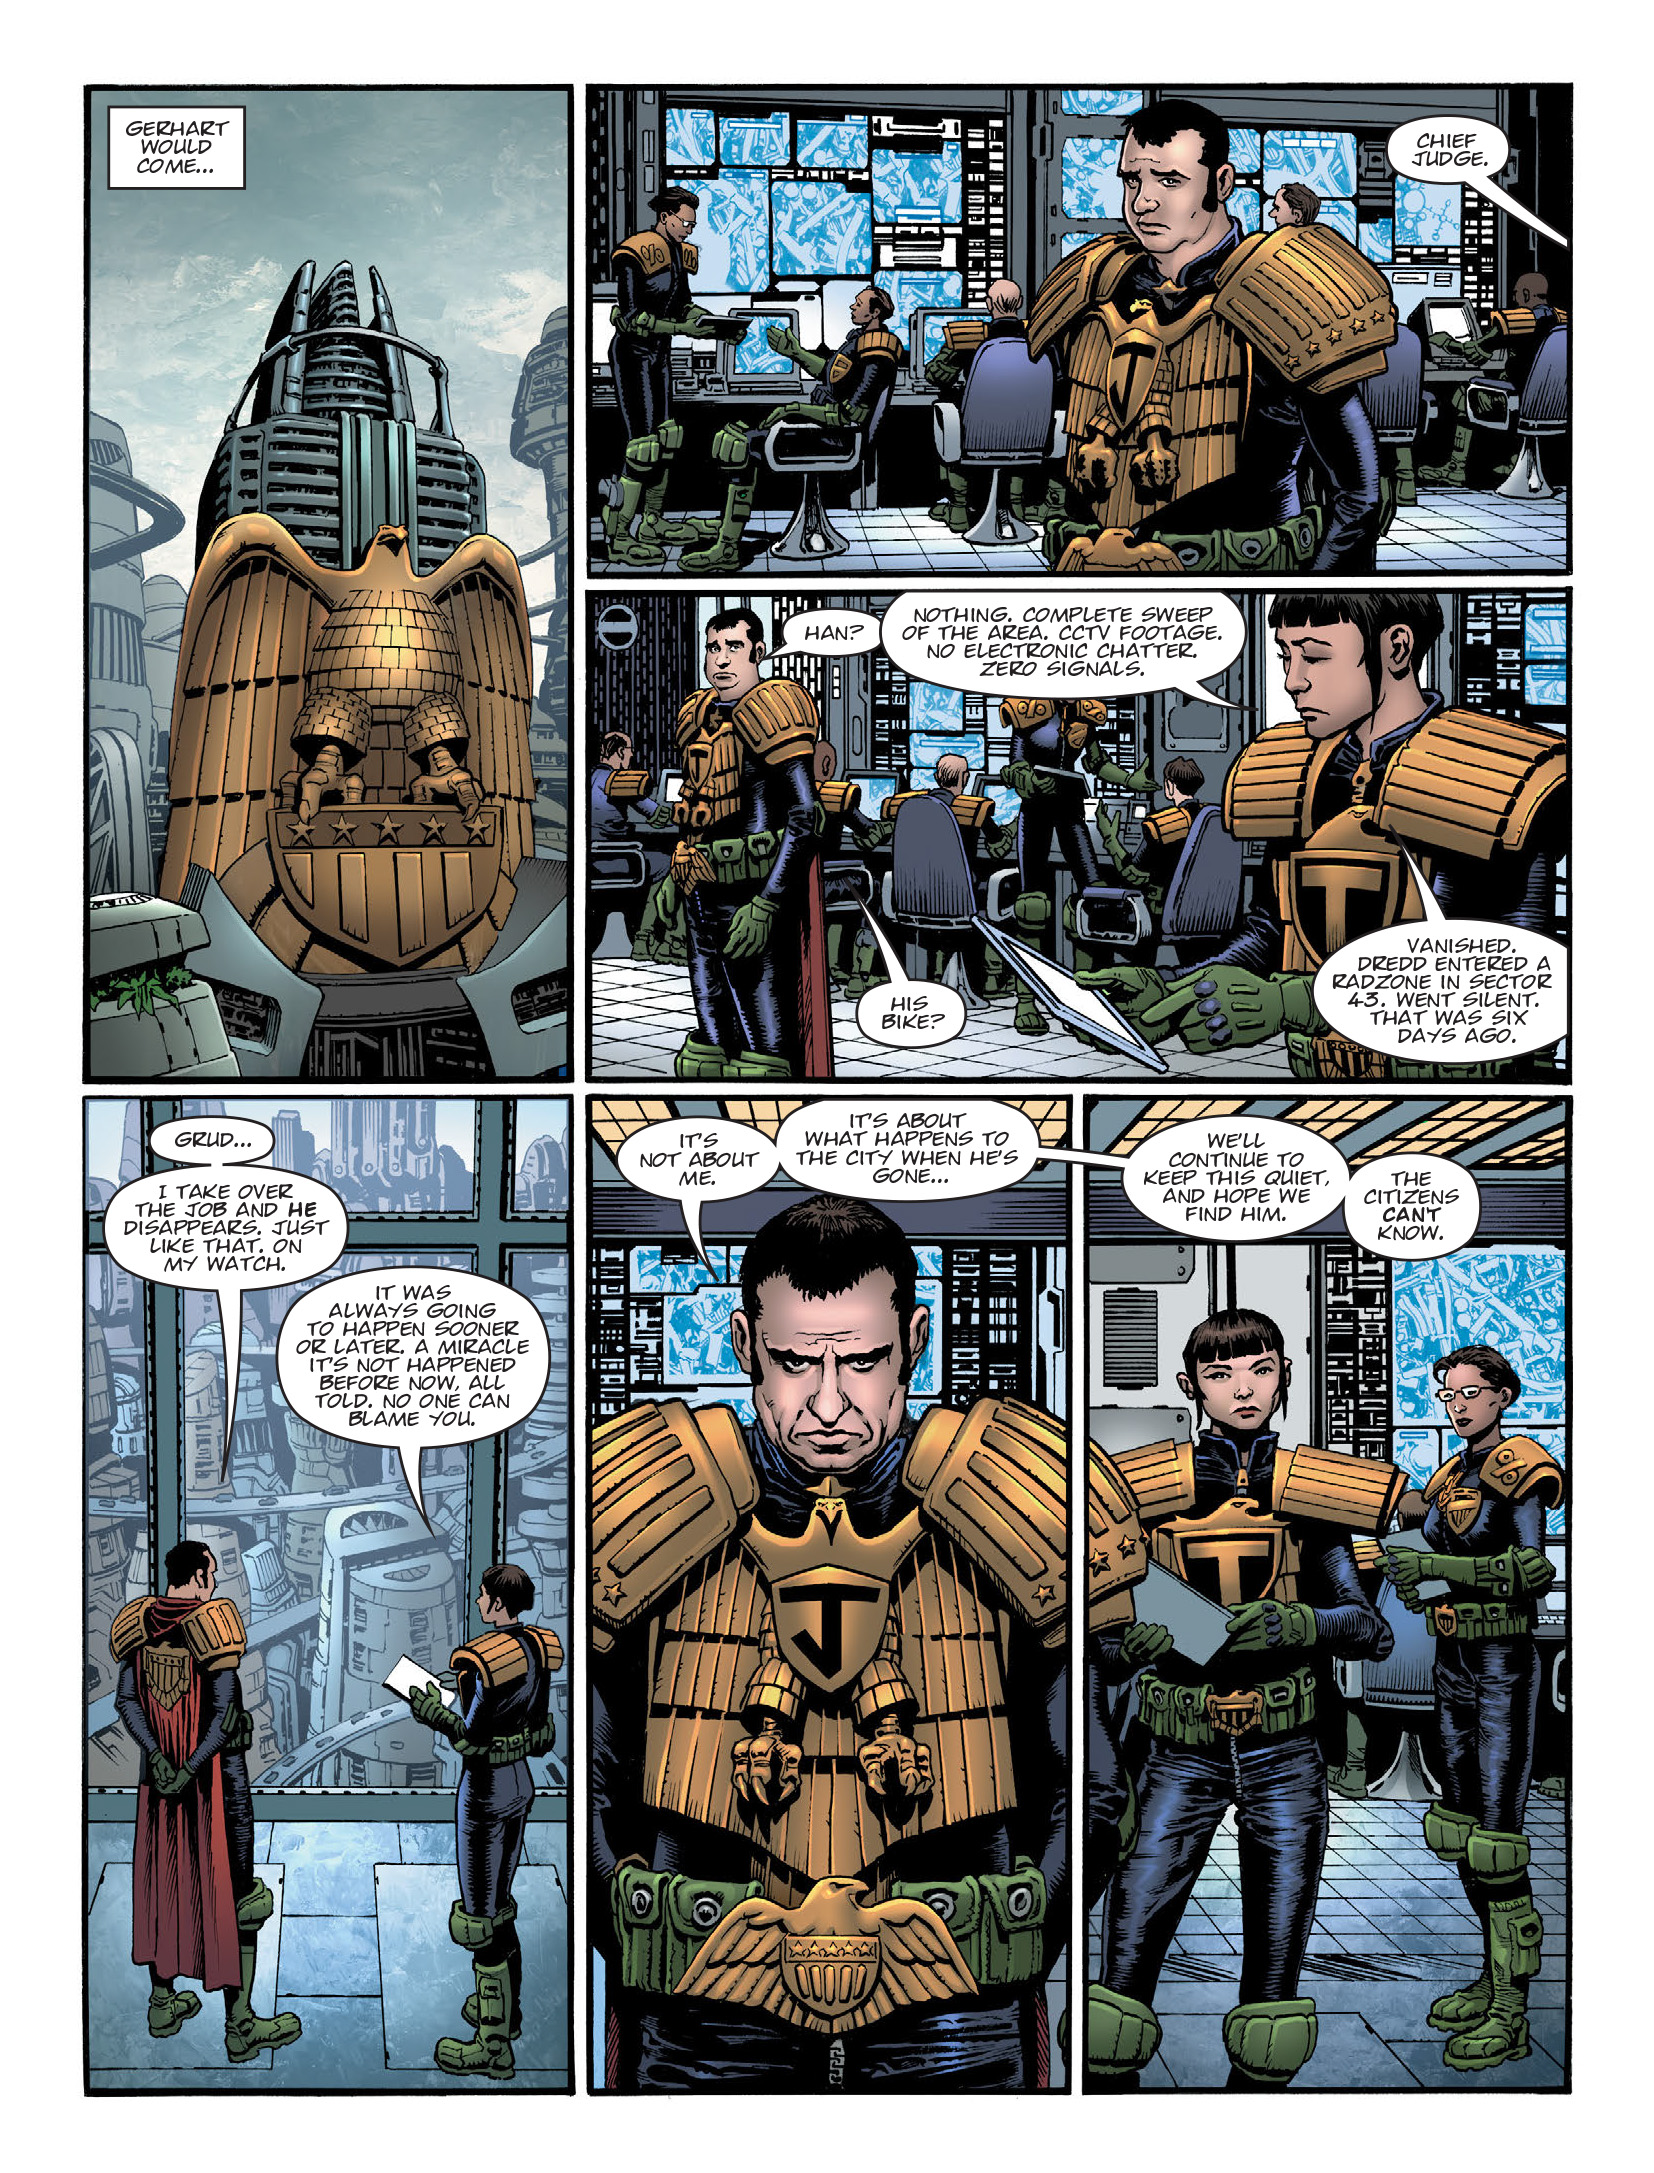 2000 AD: Chapter 2144 - Page 4